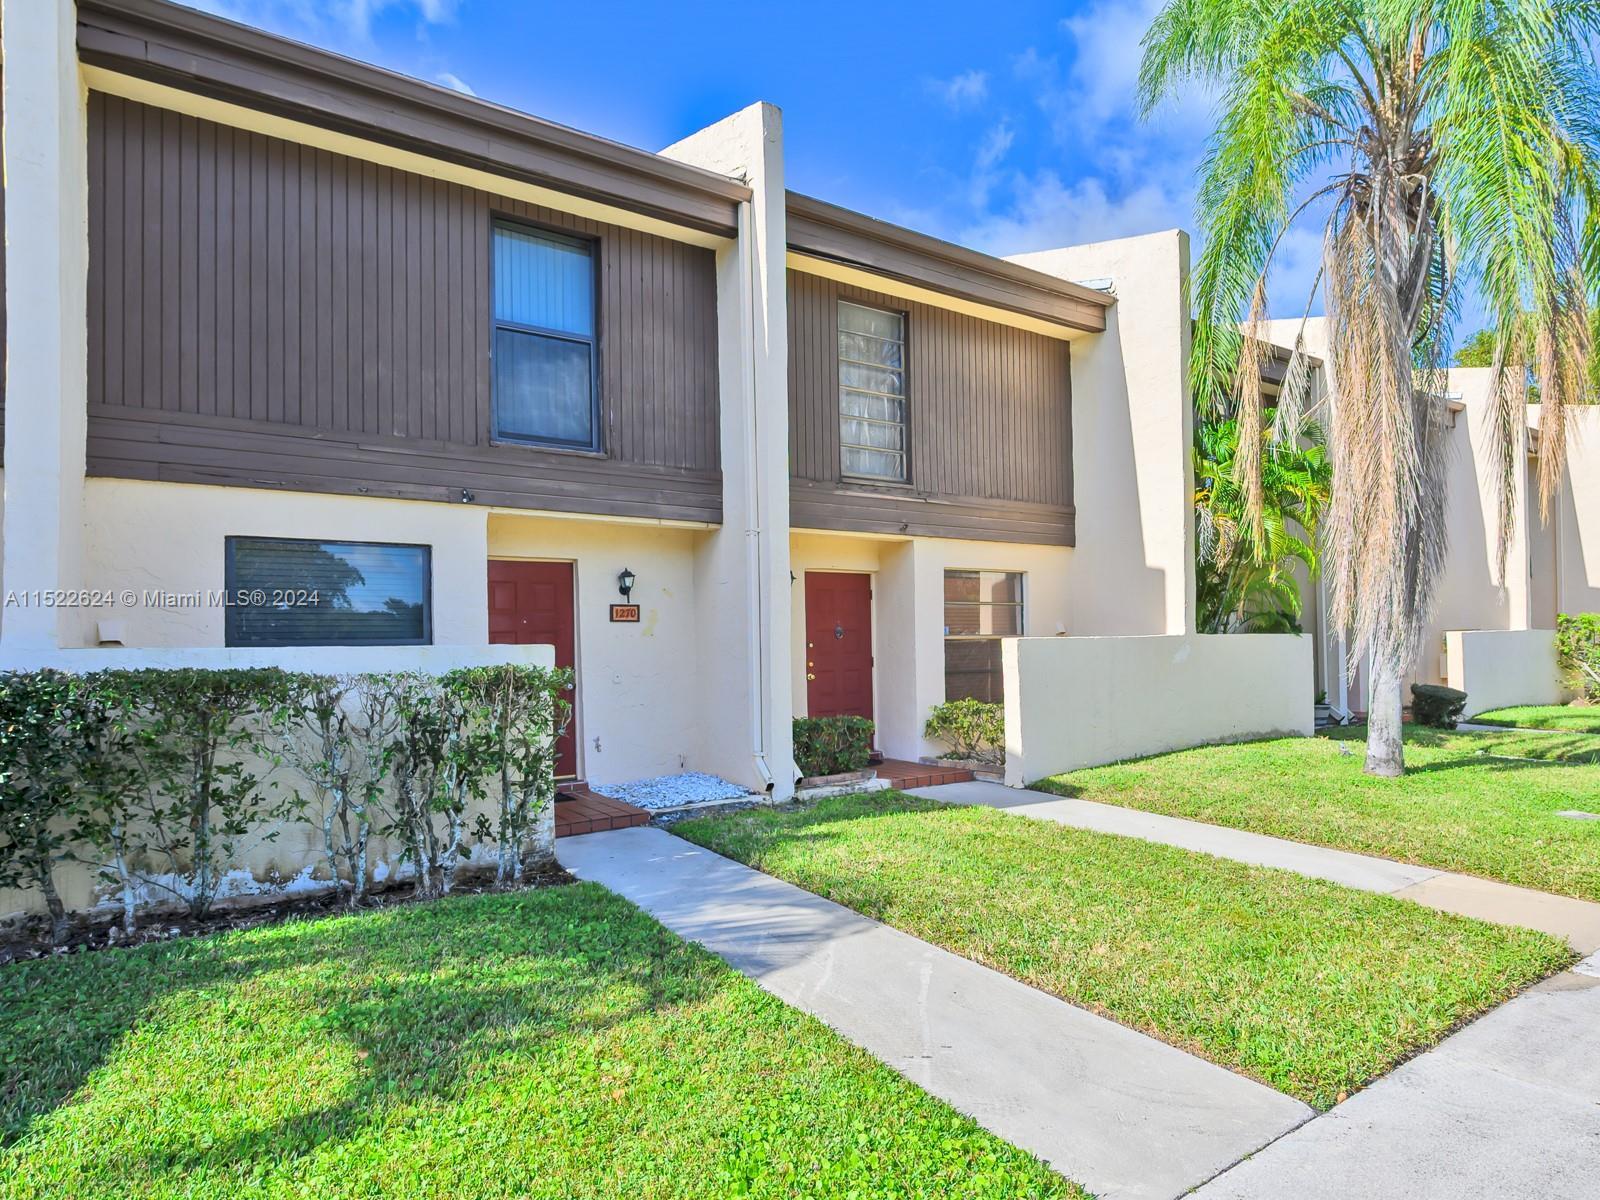 Photo of 1270 NW 99th Ave #60 in Pembroke Pines, FL